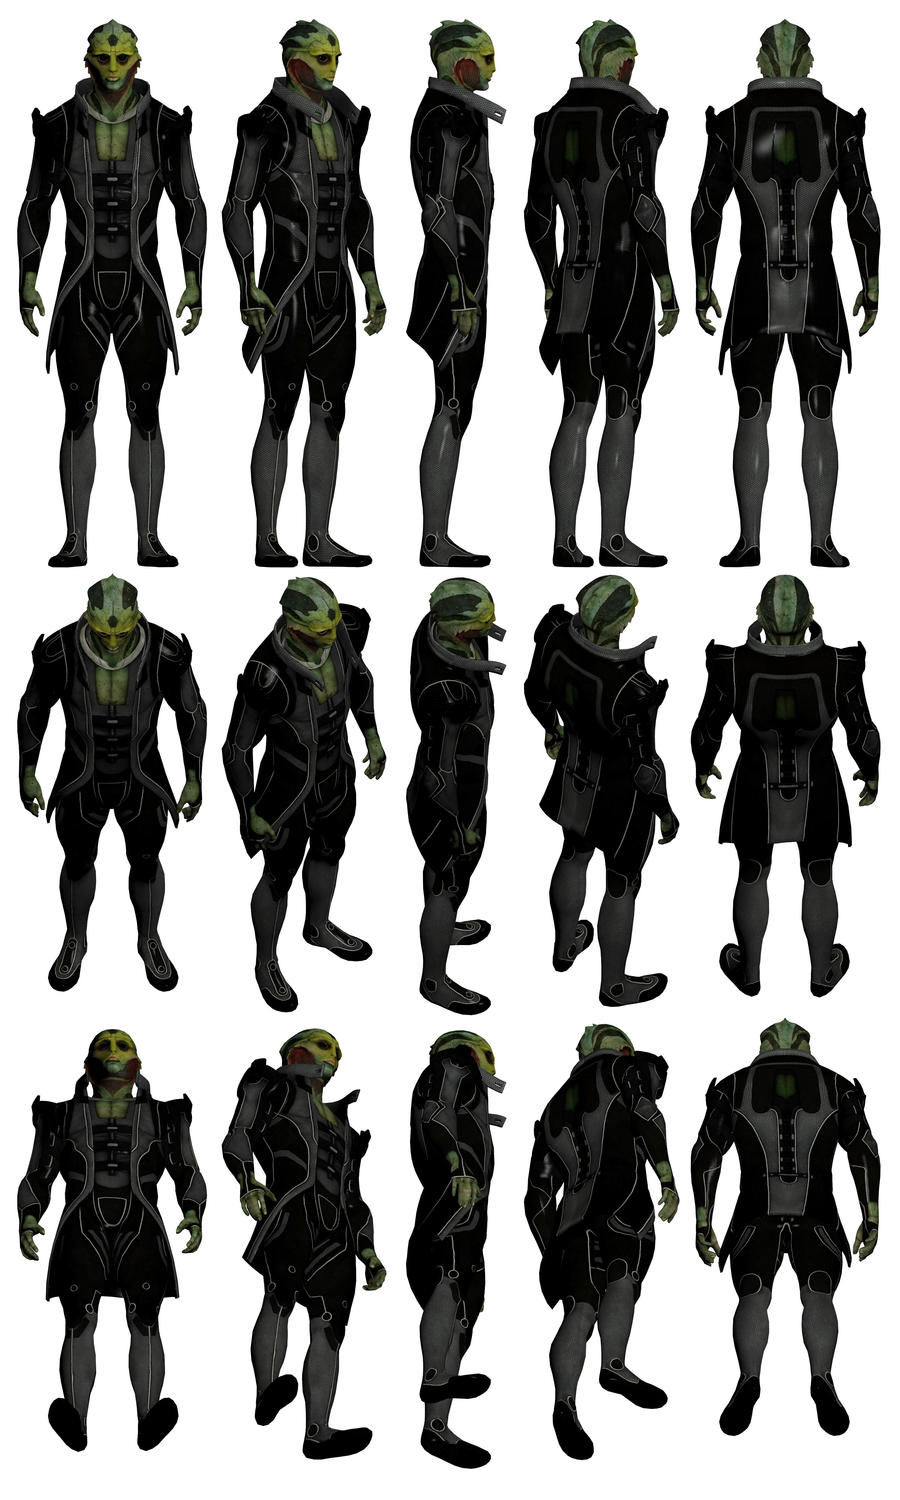 mass_effect_2__thane___model_reference__by_troodon80-d4juyi4.jpg